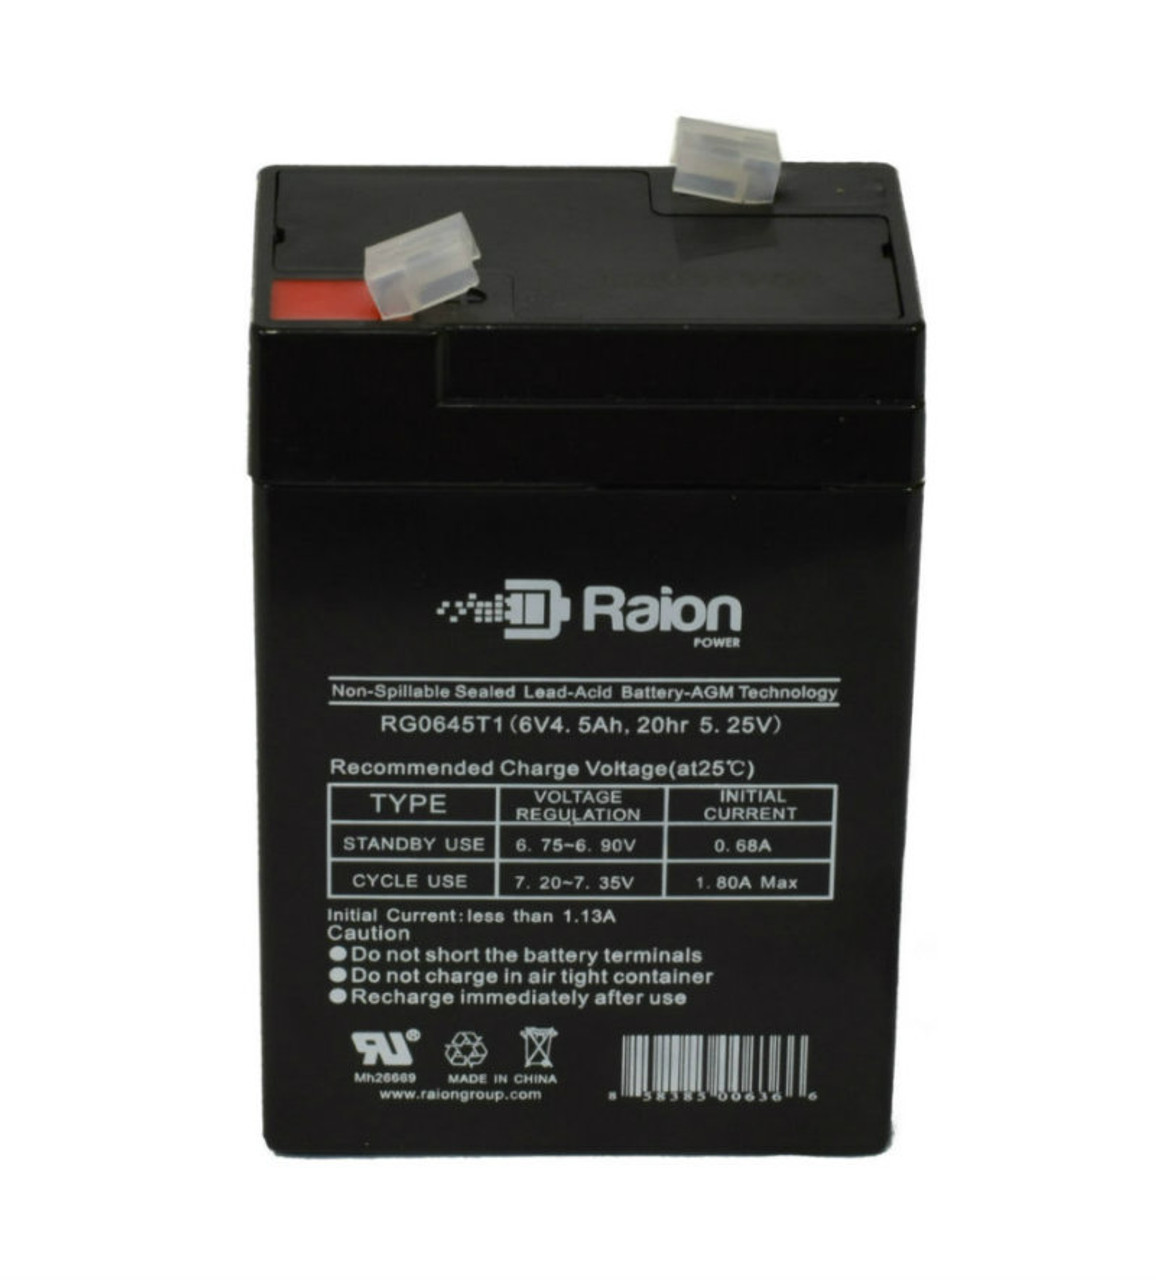 Raion Power RG0645T1 Replacement Battery Cartridge for Aokly Power 3-FM-4